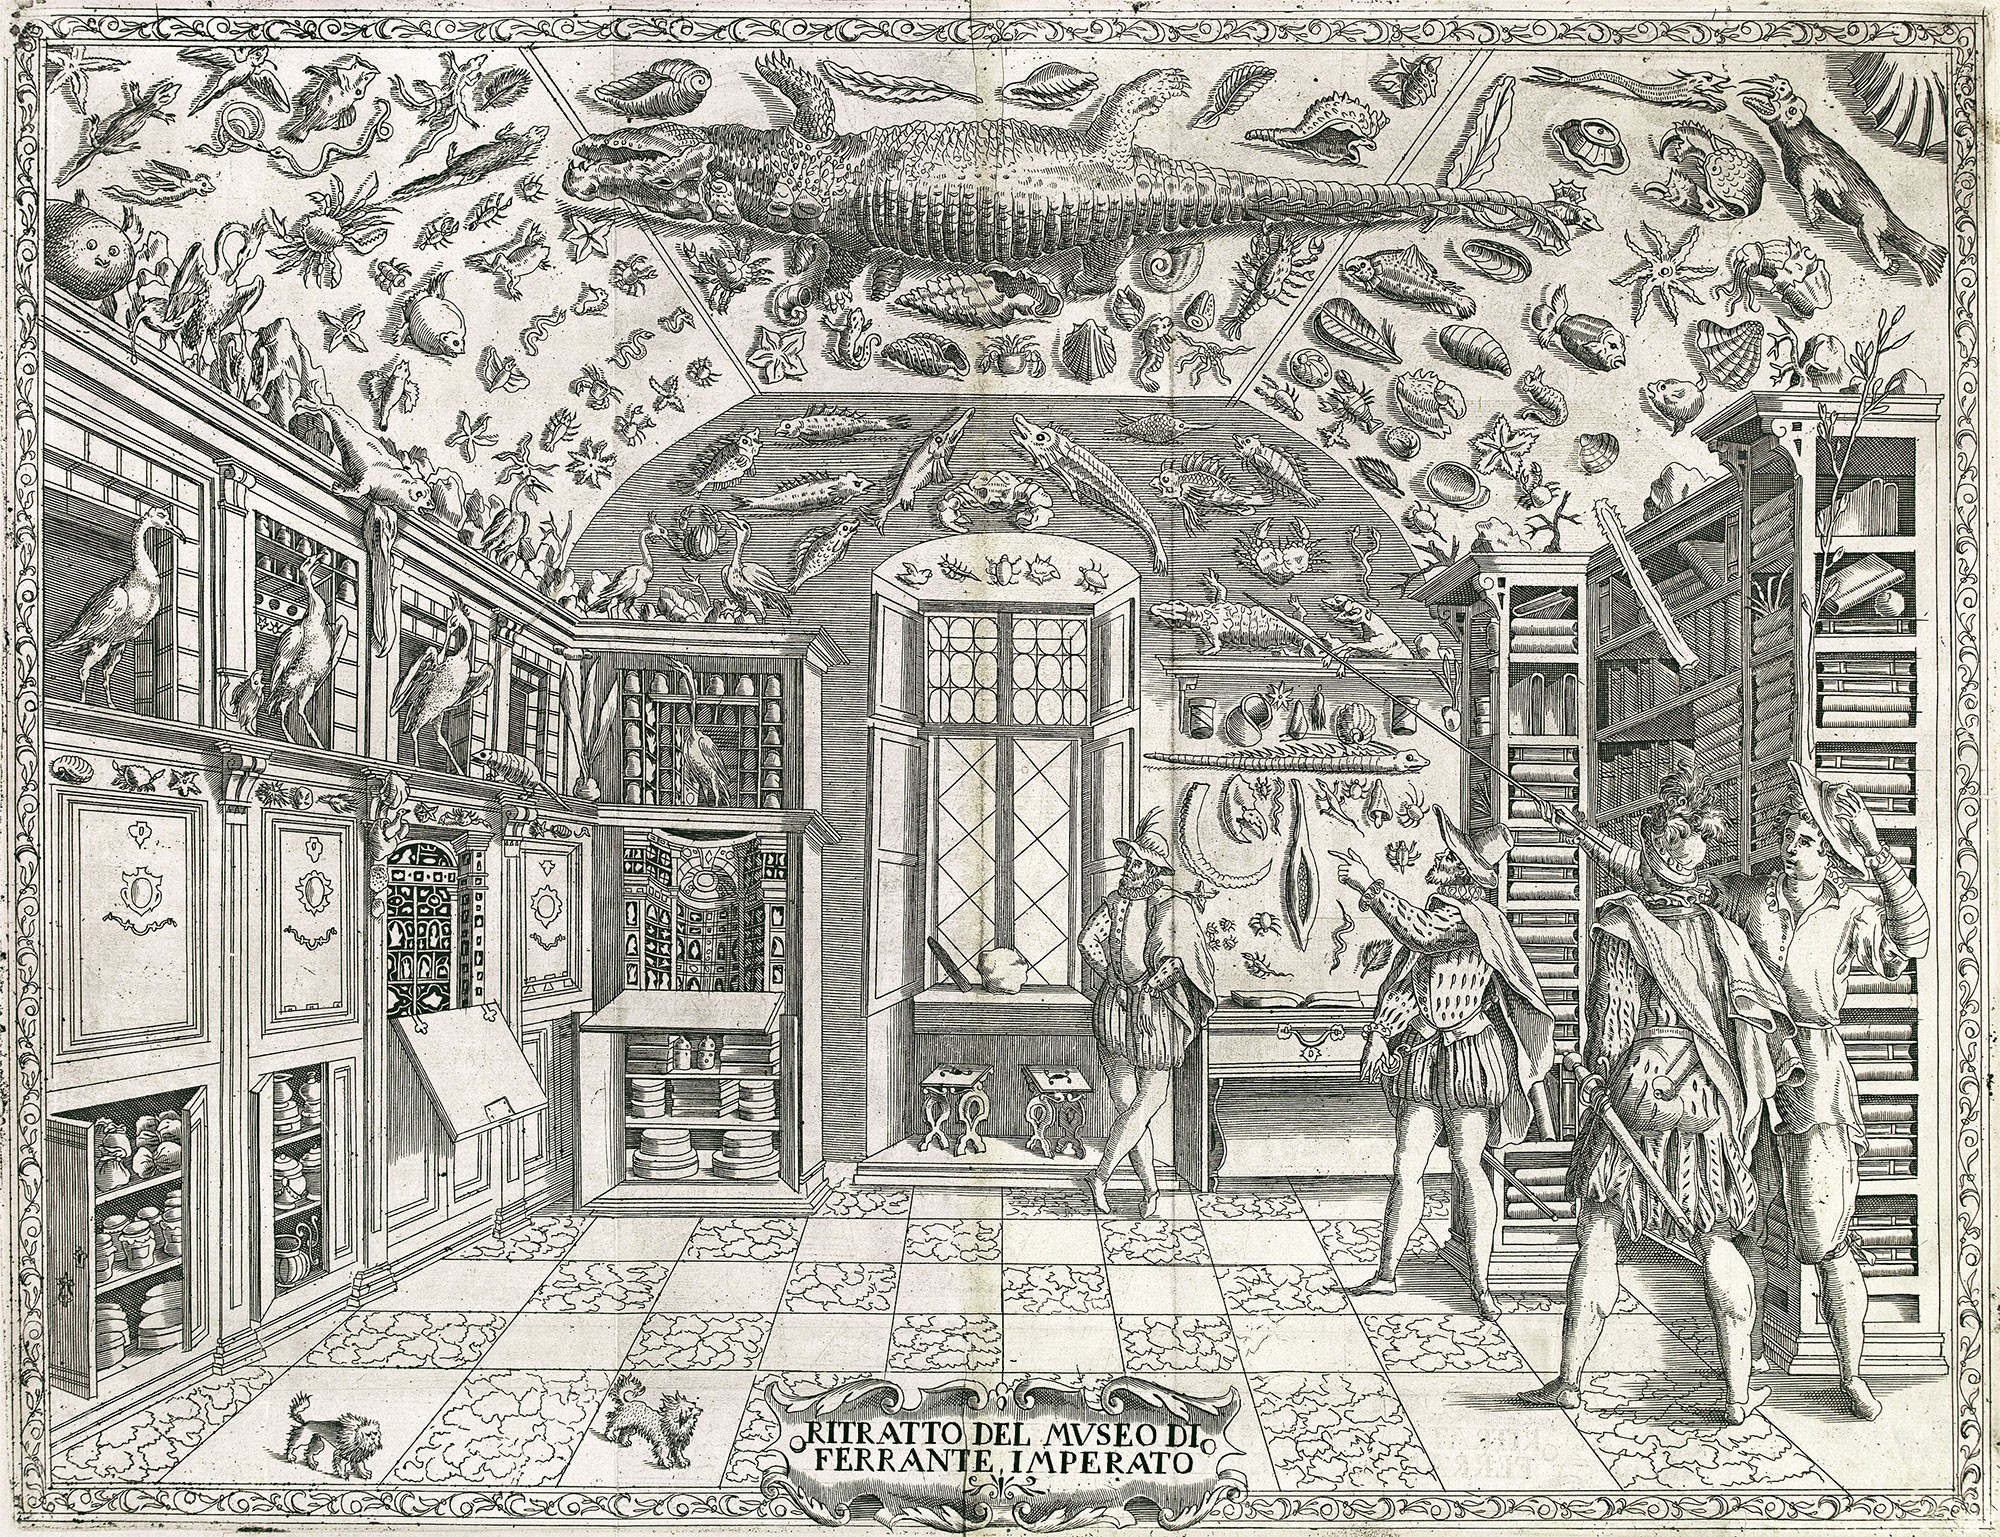 Fold-out engraving from Ferrante Imperato's Dell'Historia Naturale (Naples 1599), the earliest illustration of a natural history cabinet. Source: Wikimedia.